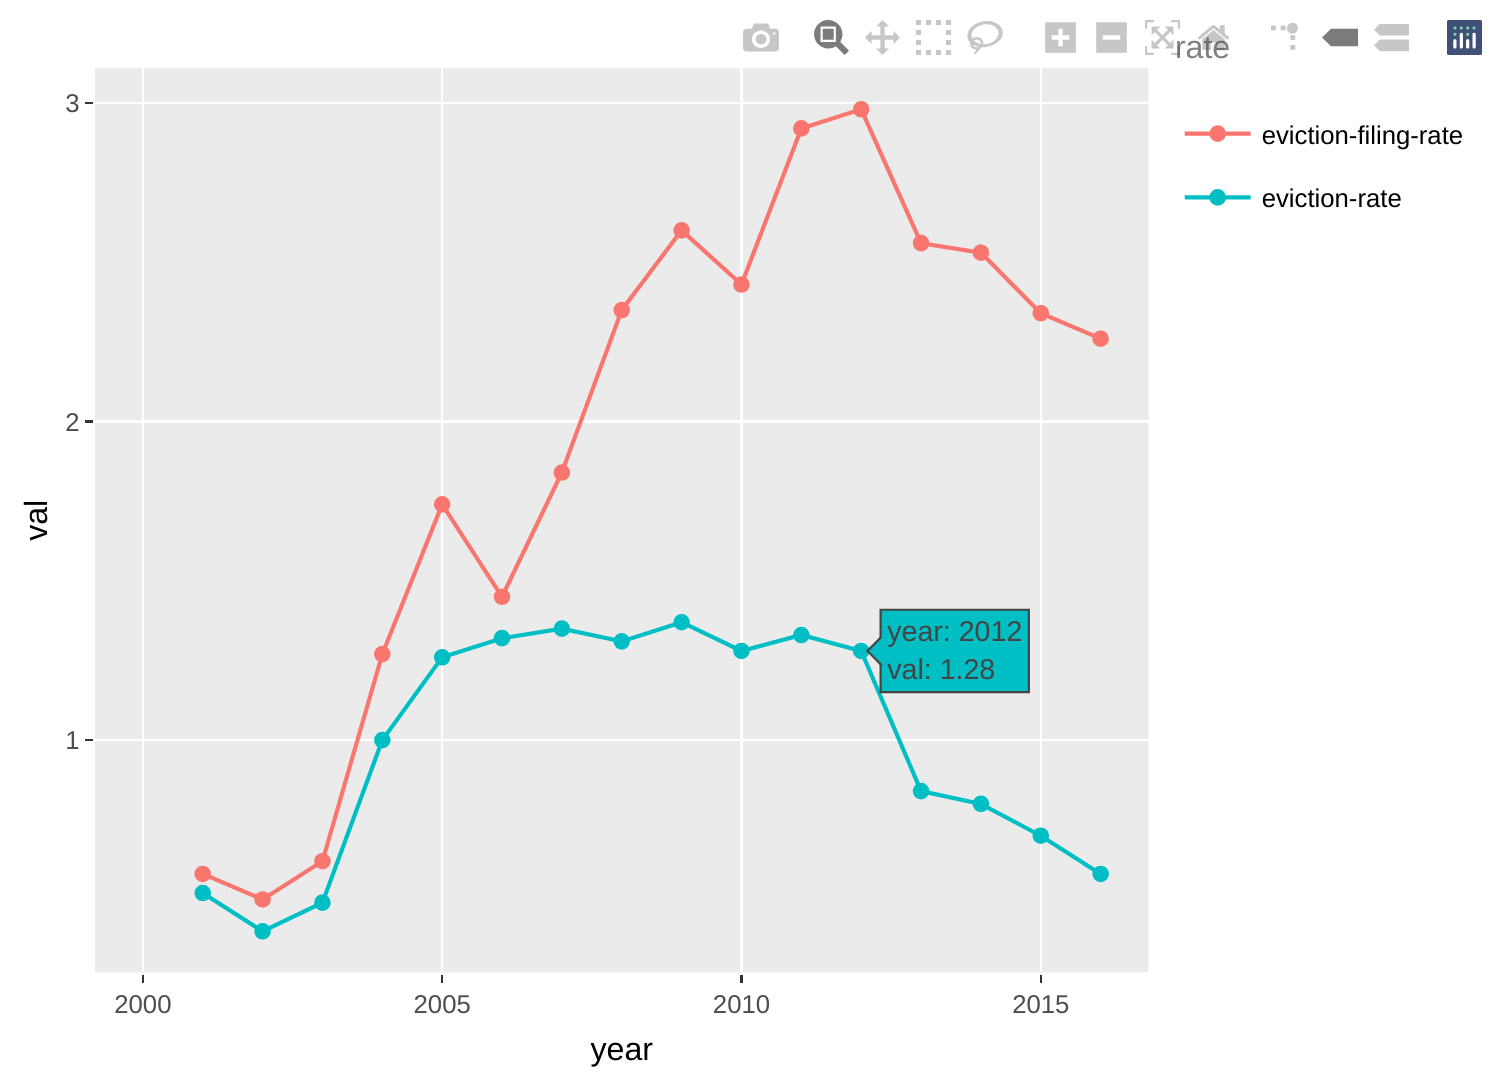 An interactive line chart comparing eviction rates over time